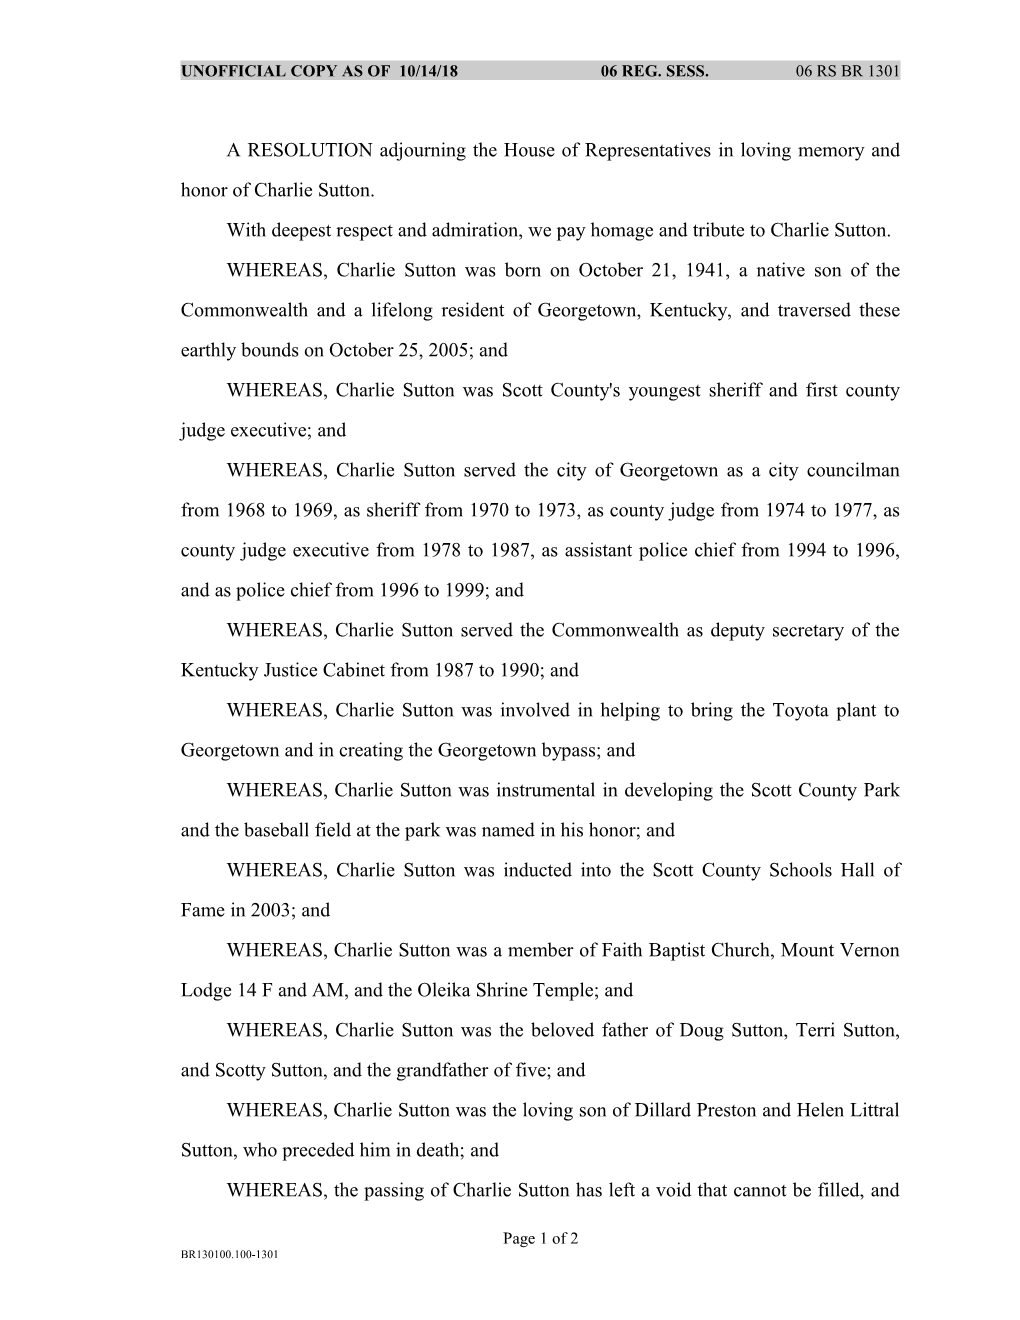 A RESOLUTION Adjourning the House of Representatives in Loving Memory and Honor of Charlie